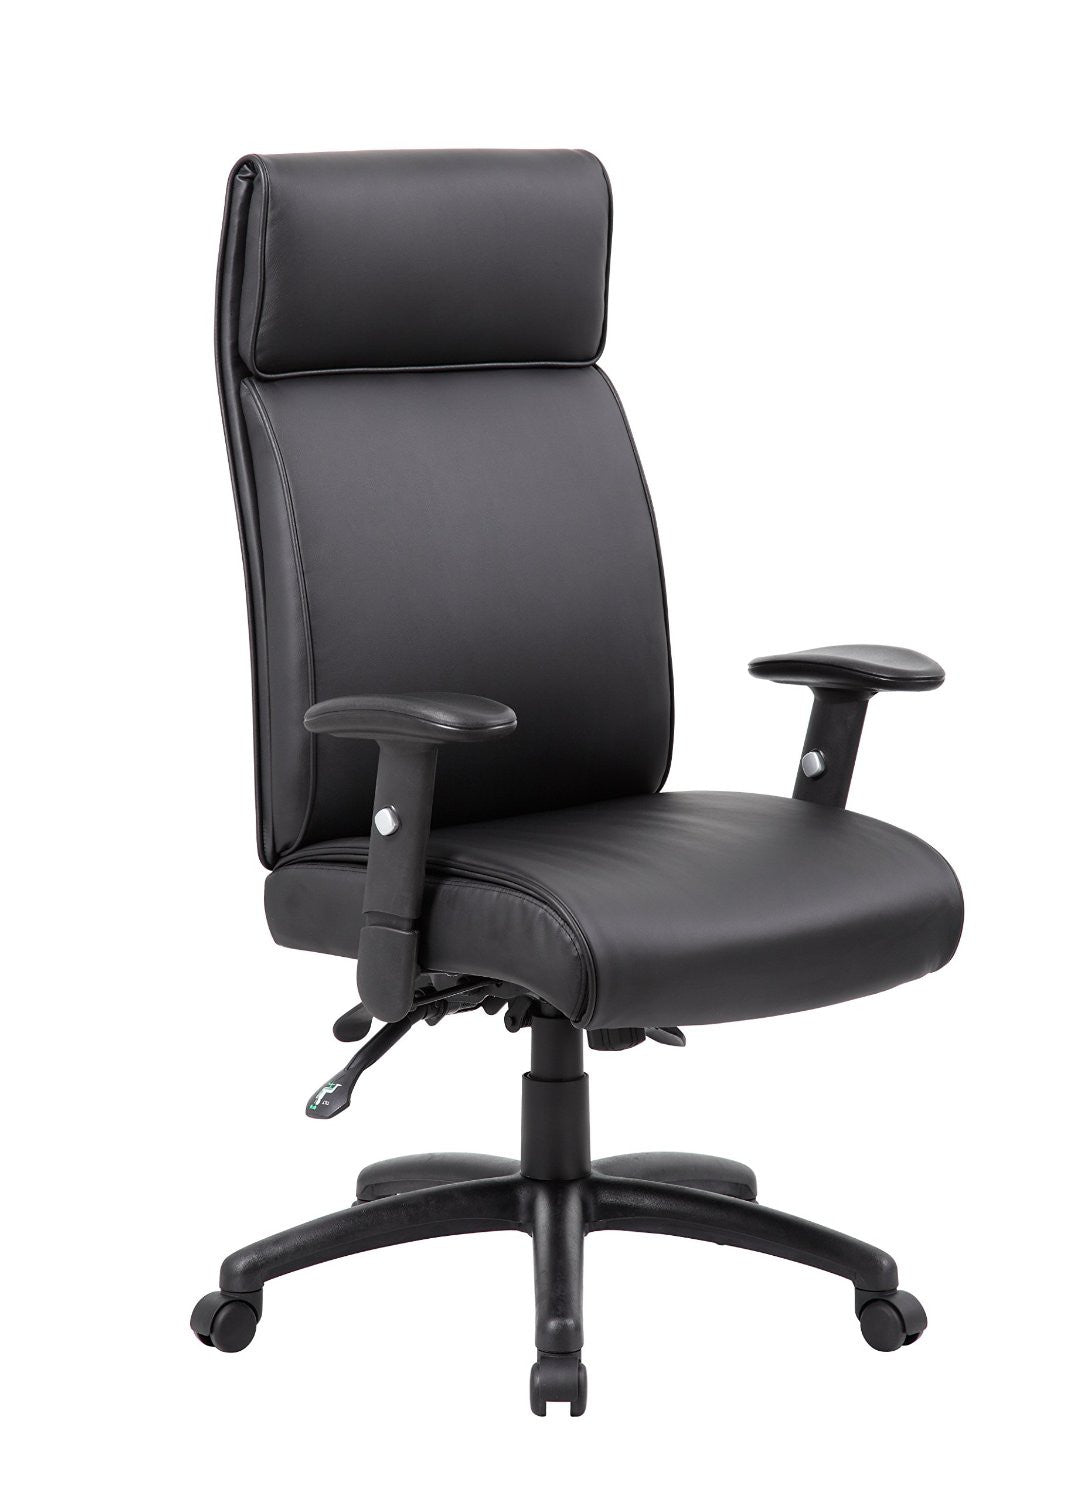 Boss Office Products B710-bk Boss Multi-function Executive High Back Chair